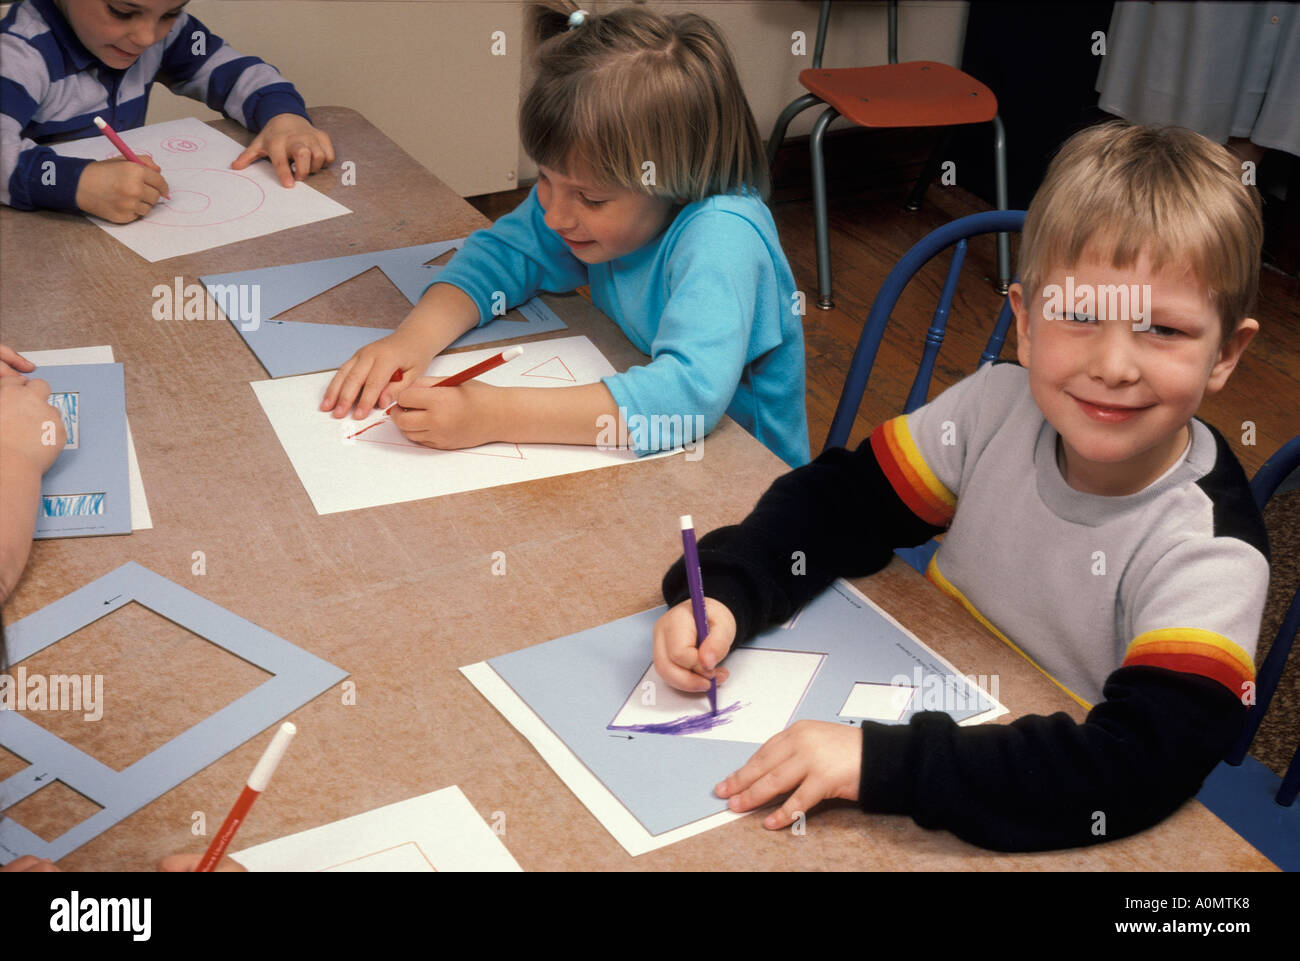 students kids child children concentrating skill group cutting shapes knowledge wisdom fun lesson Stock Photo